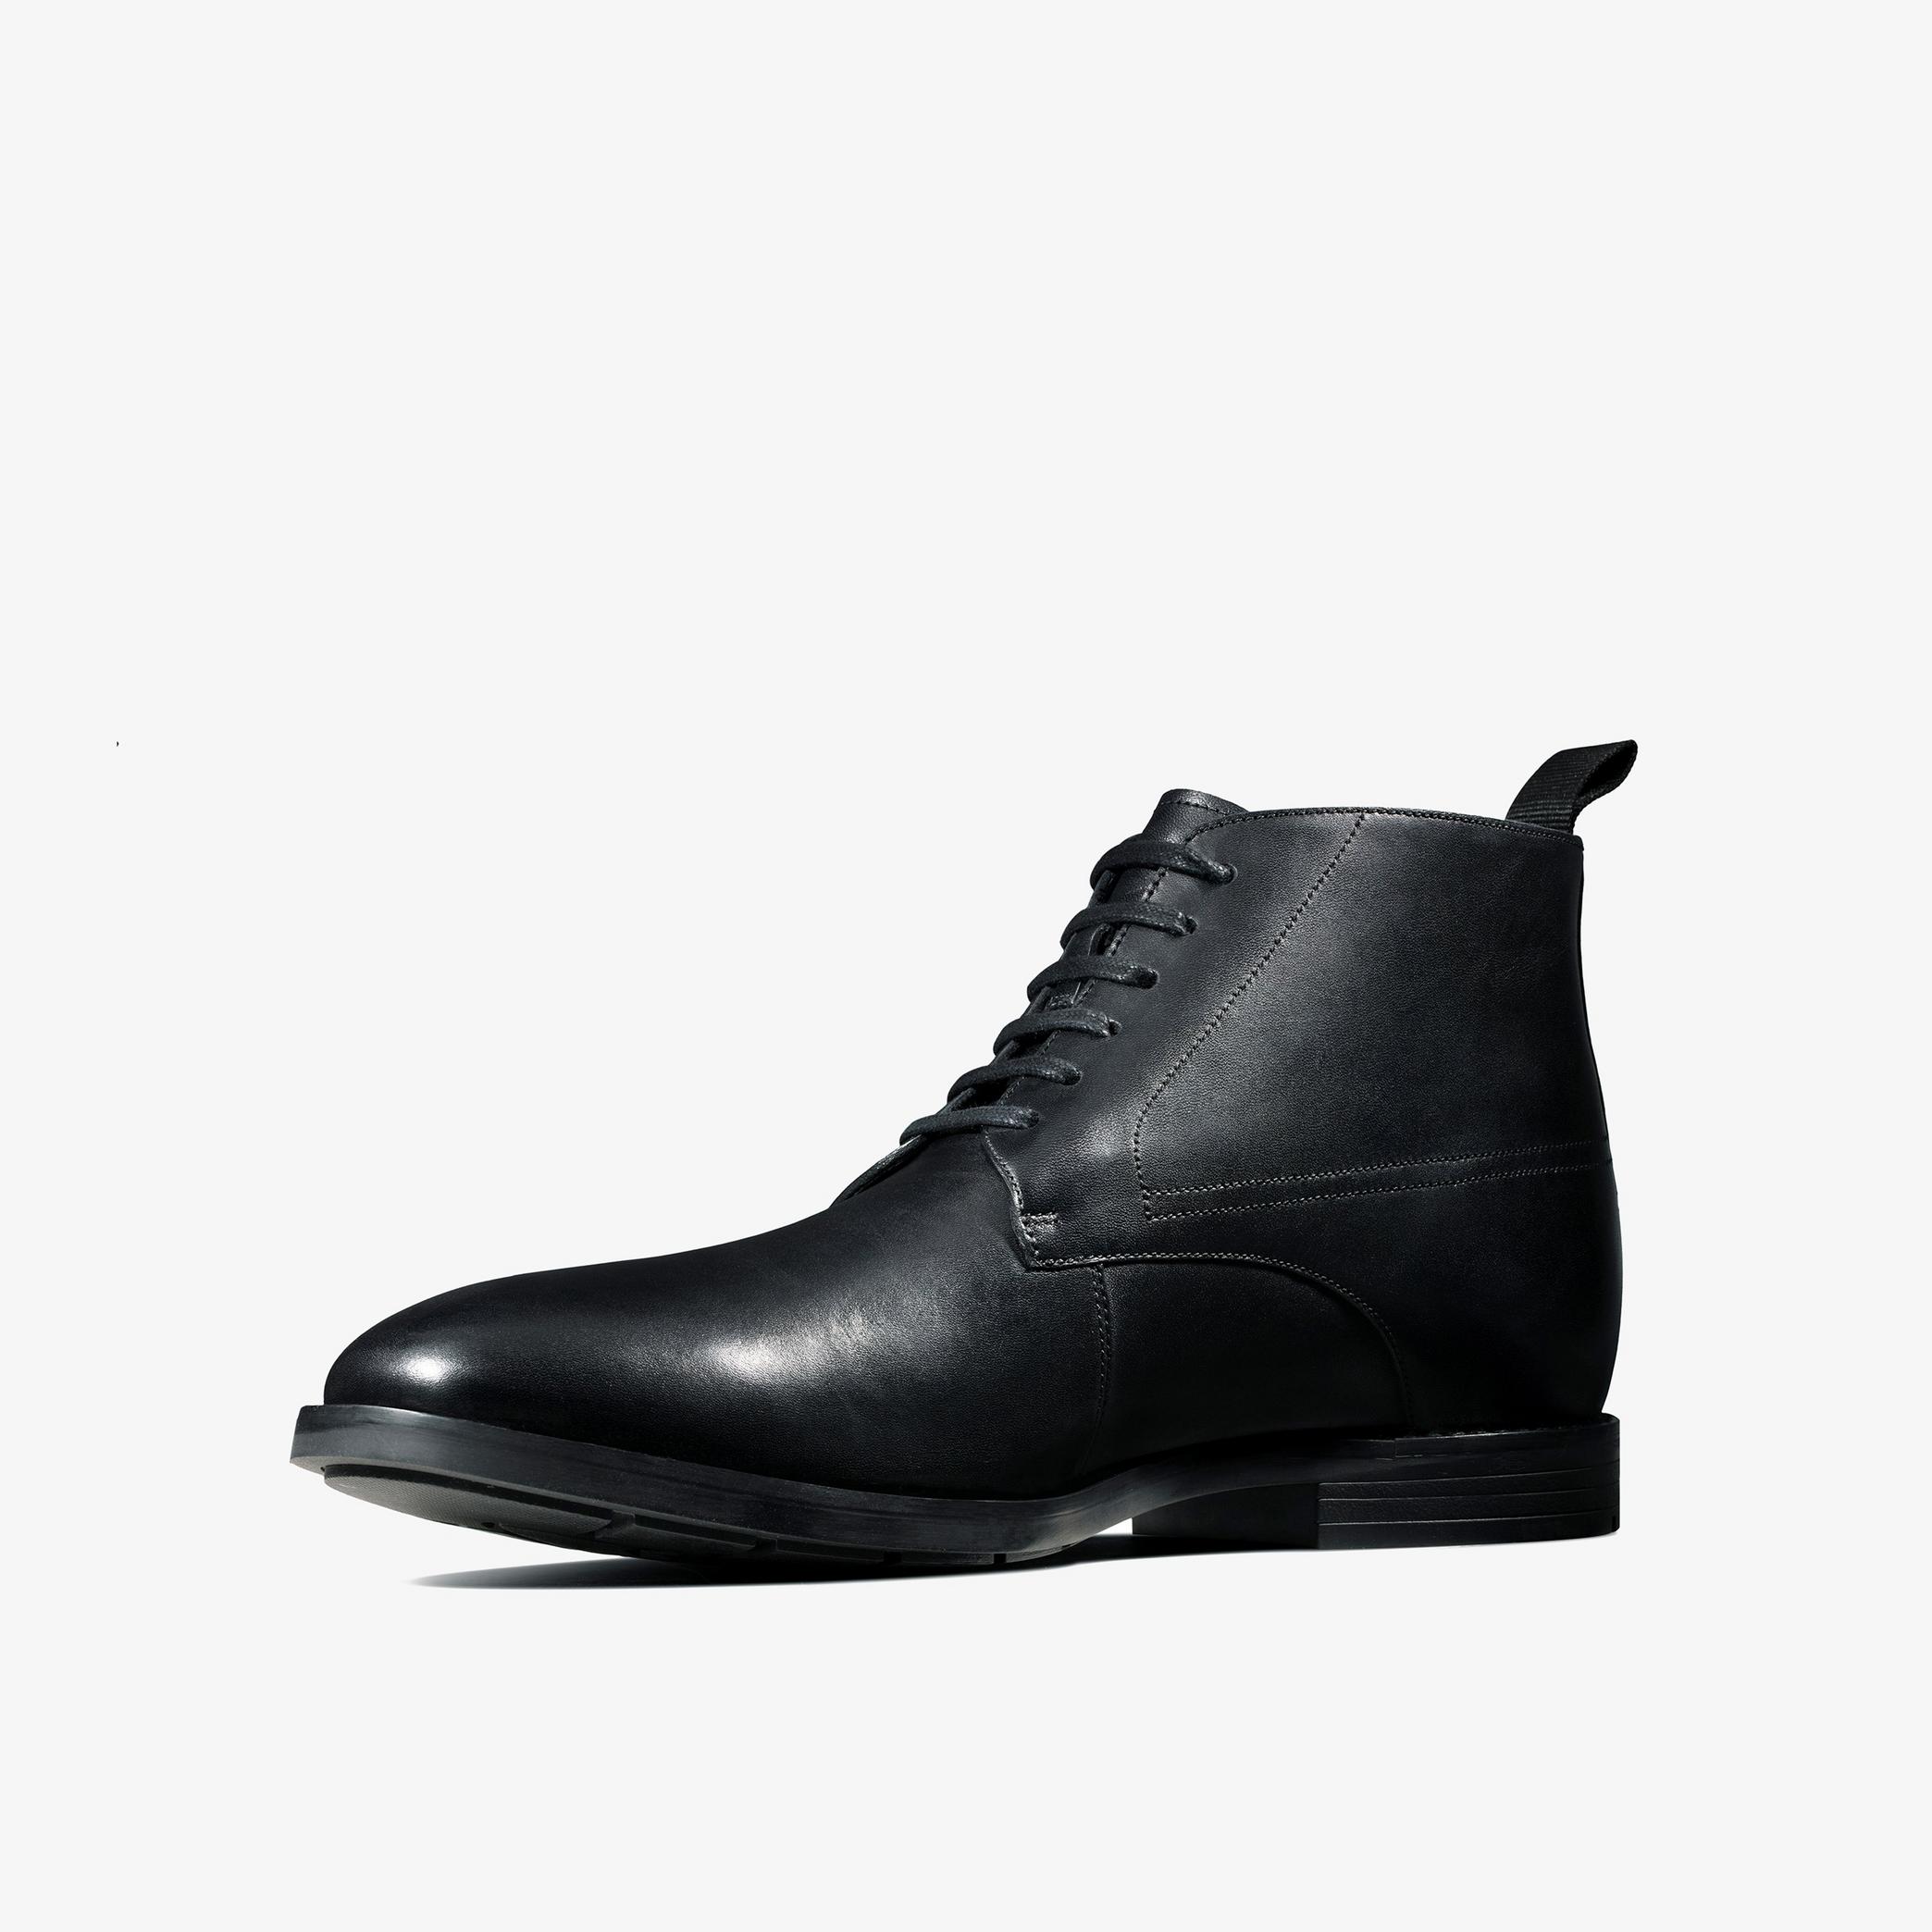 Ronnie Up GTX Black Leather Boots, view 4 of 6